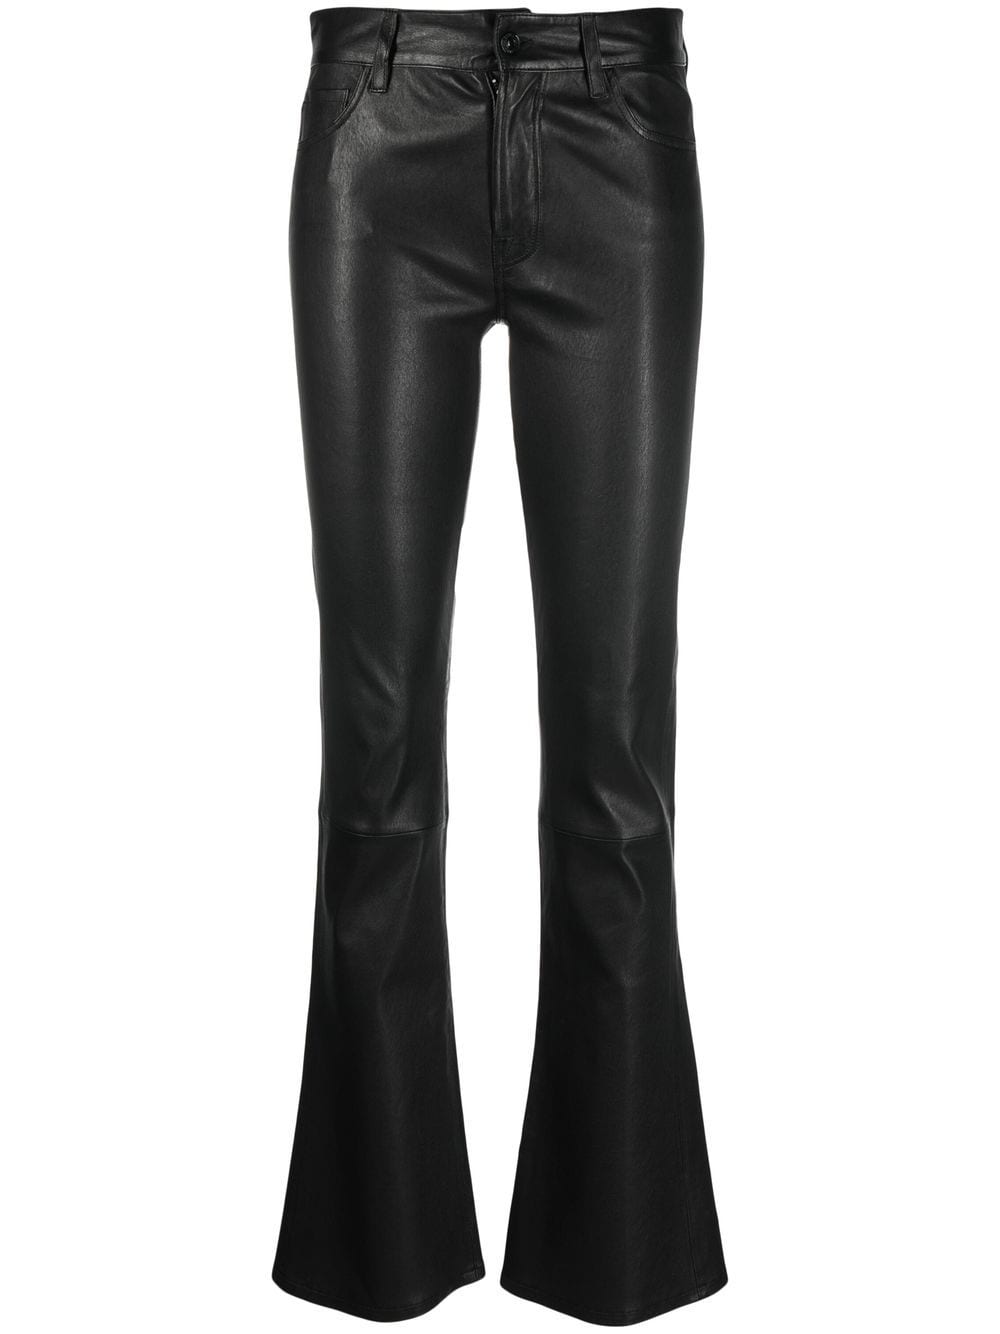 7 For All Mankind high-waisted leather pants - Black von 7 For All Mankind